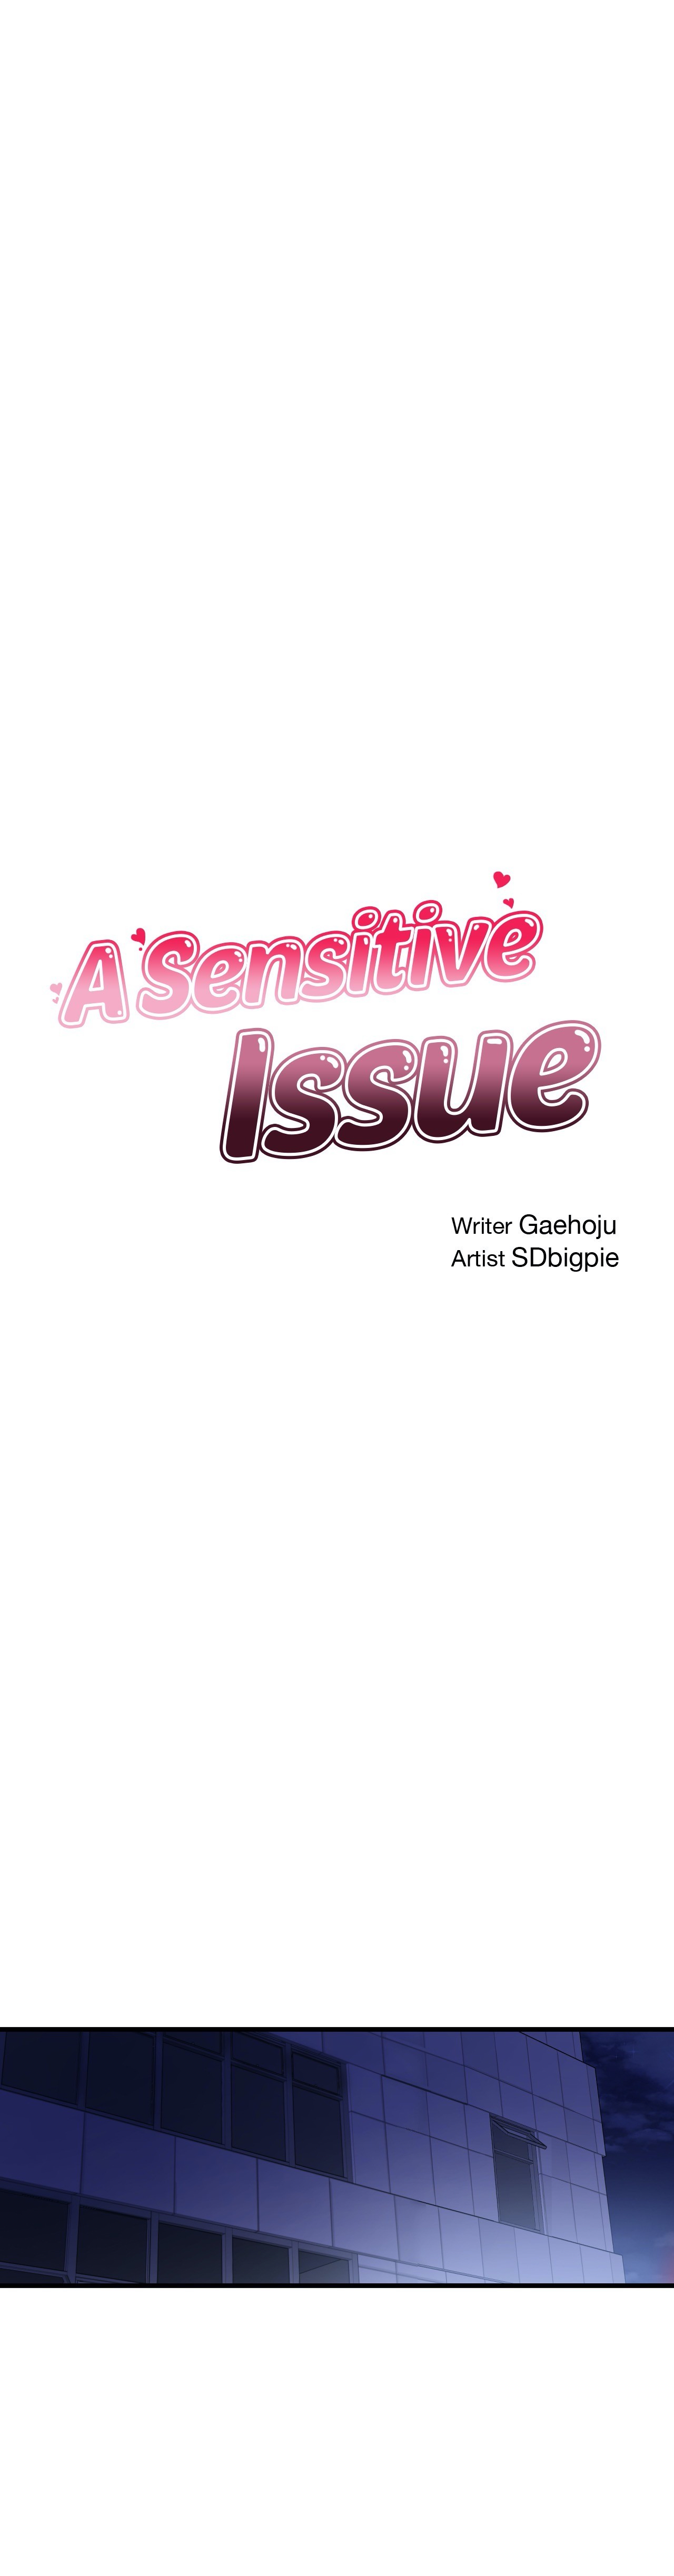 A Sensitive Issue image